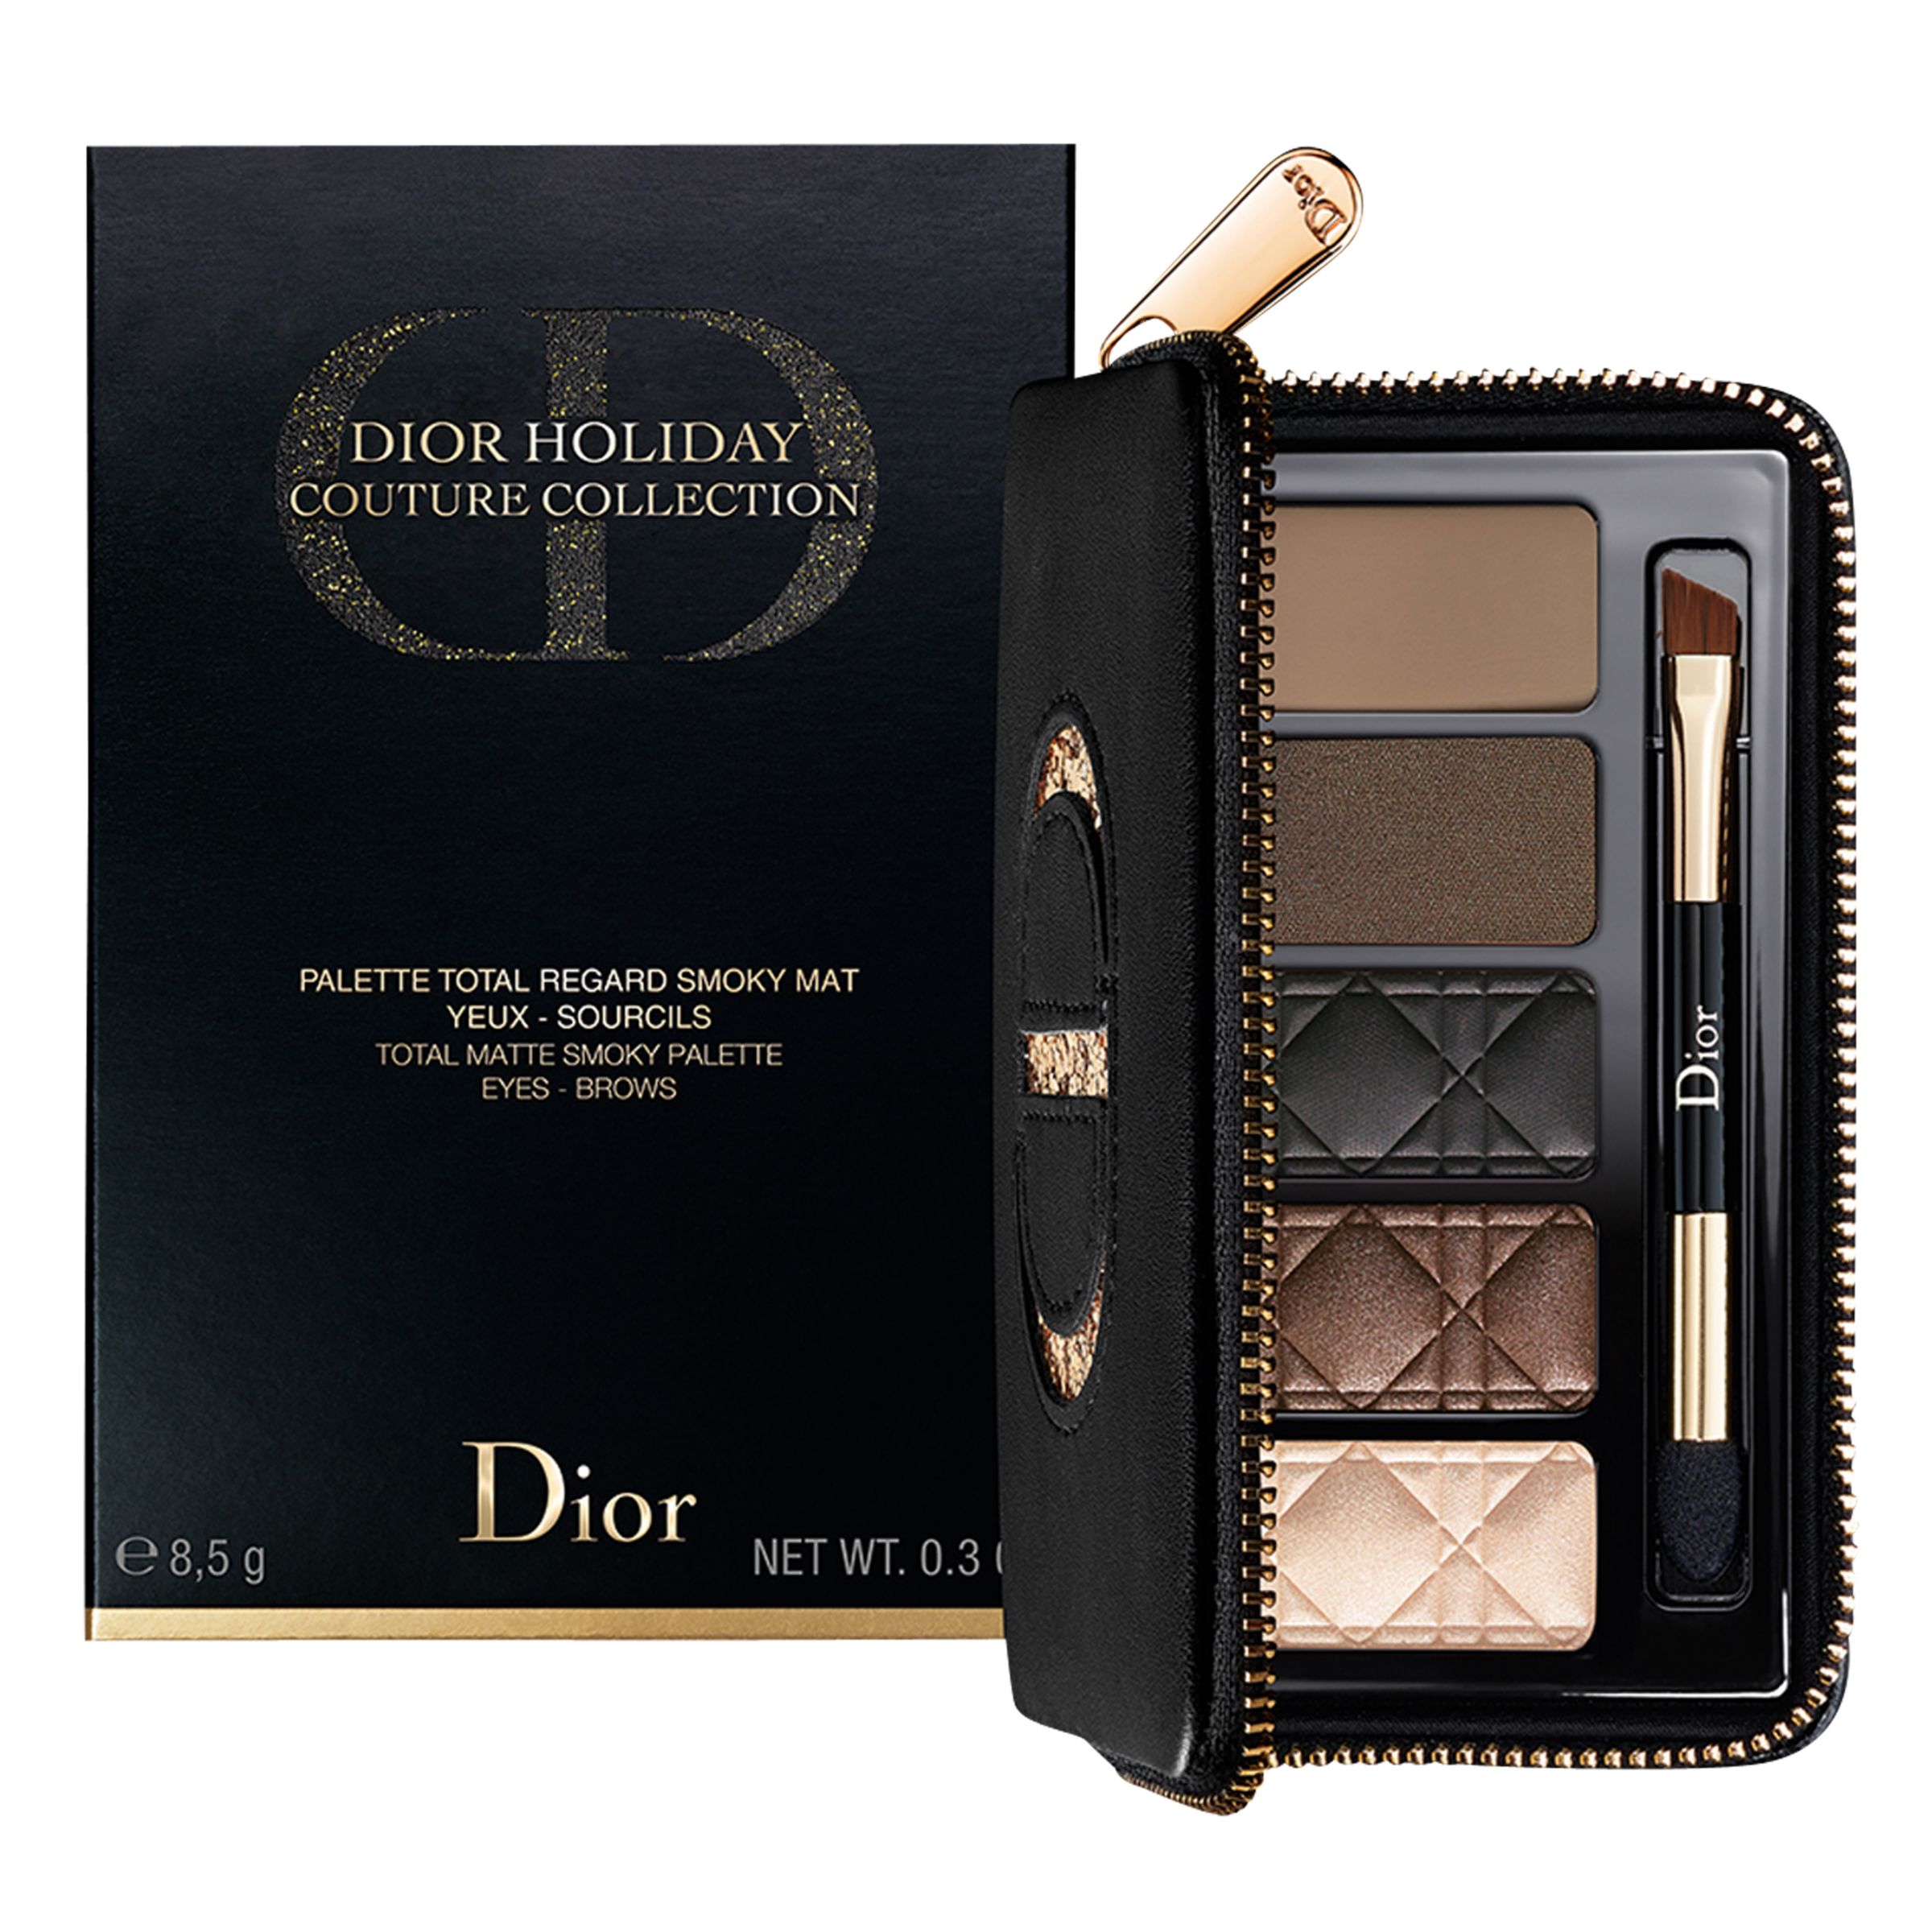 Dior Holiday Couture Collection Total Matte Smoky Palette Makeup Gift